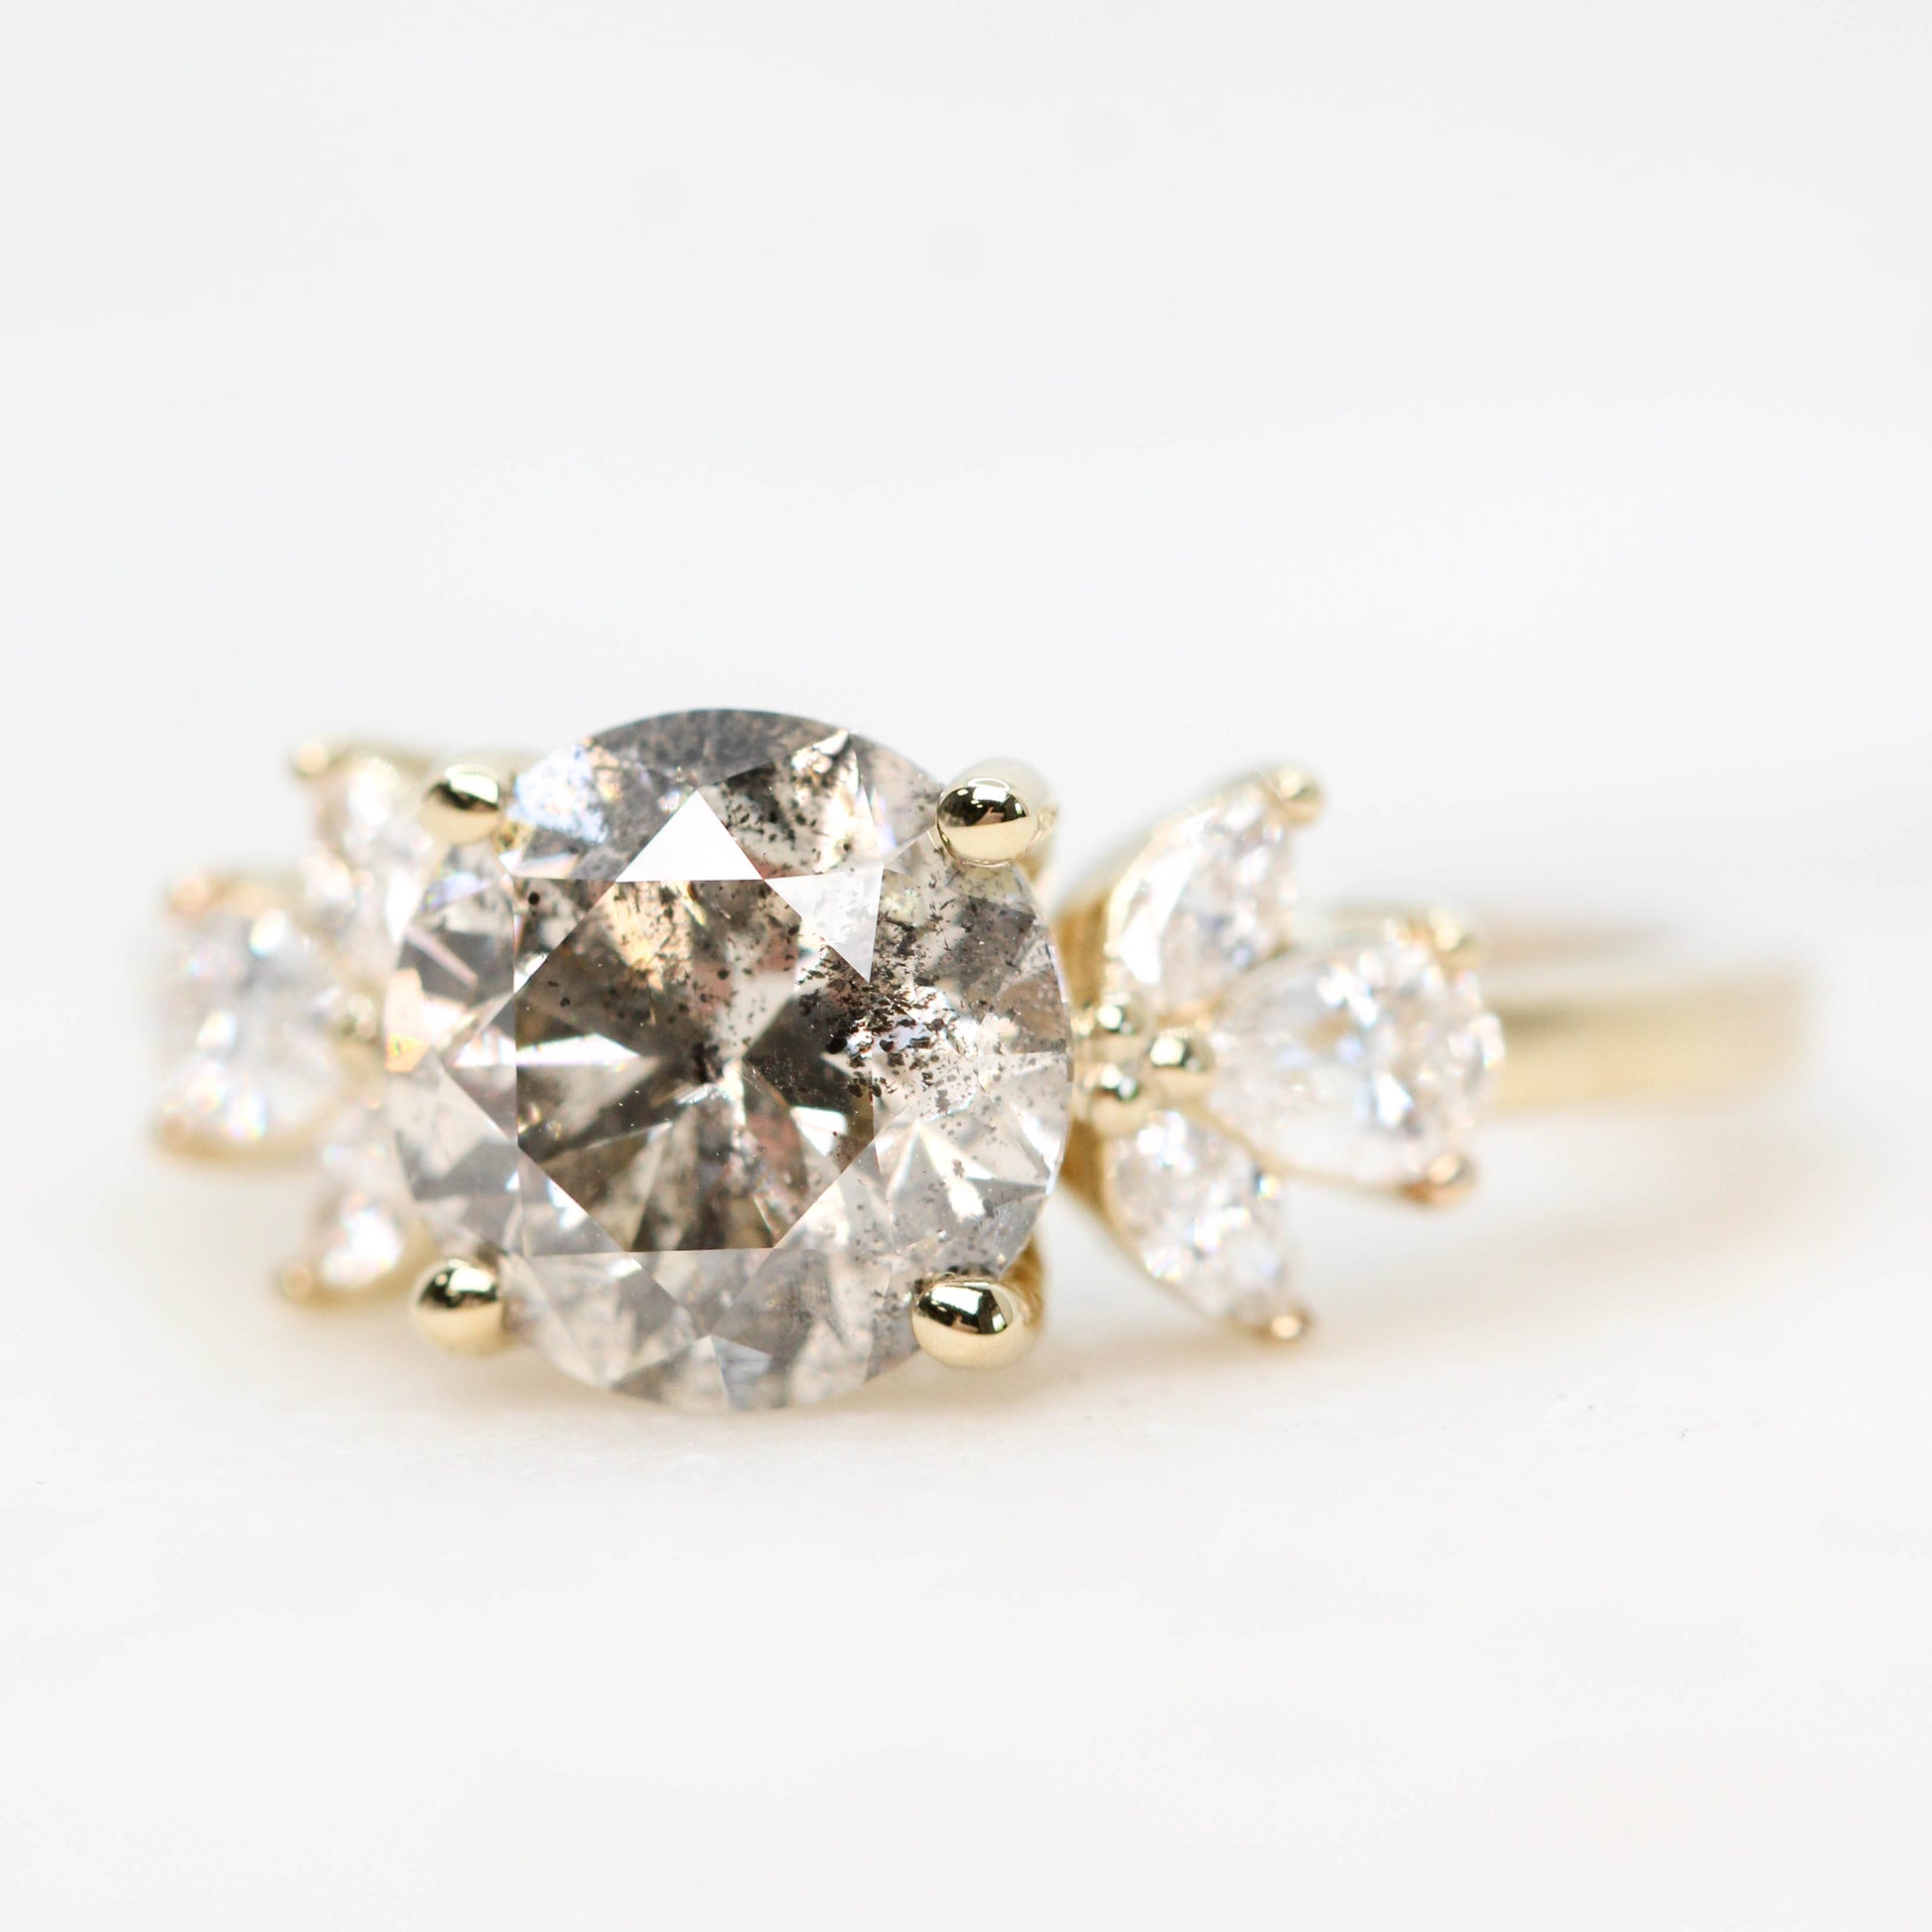 Kendra Ring with a 2.50 Carat Round Champagne Salt and Pepper Diamond and White Accent Diamonds in 14k Yellow Gold - Ready to Size and Ship - Midwinter Co. Alternative Bridal Rings and Modern Fine Jewelry